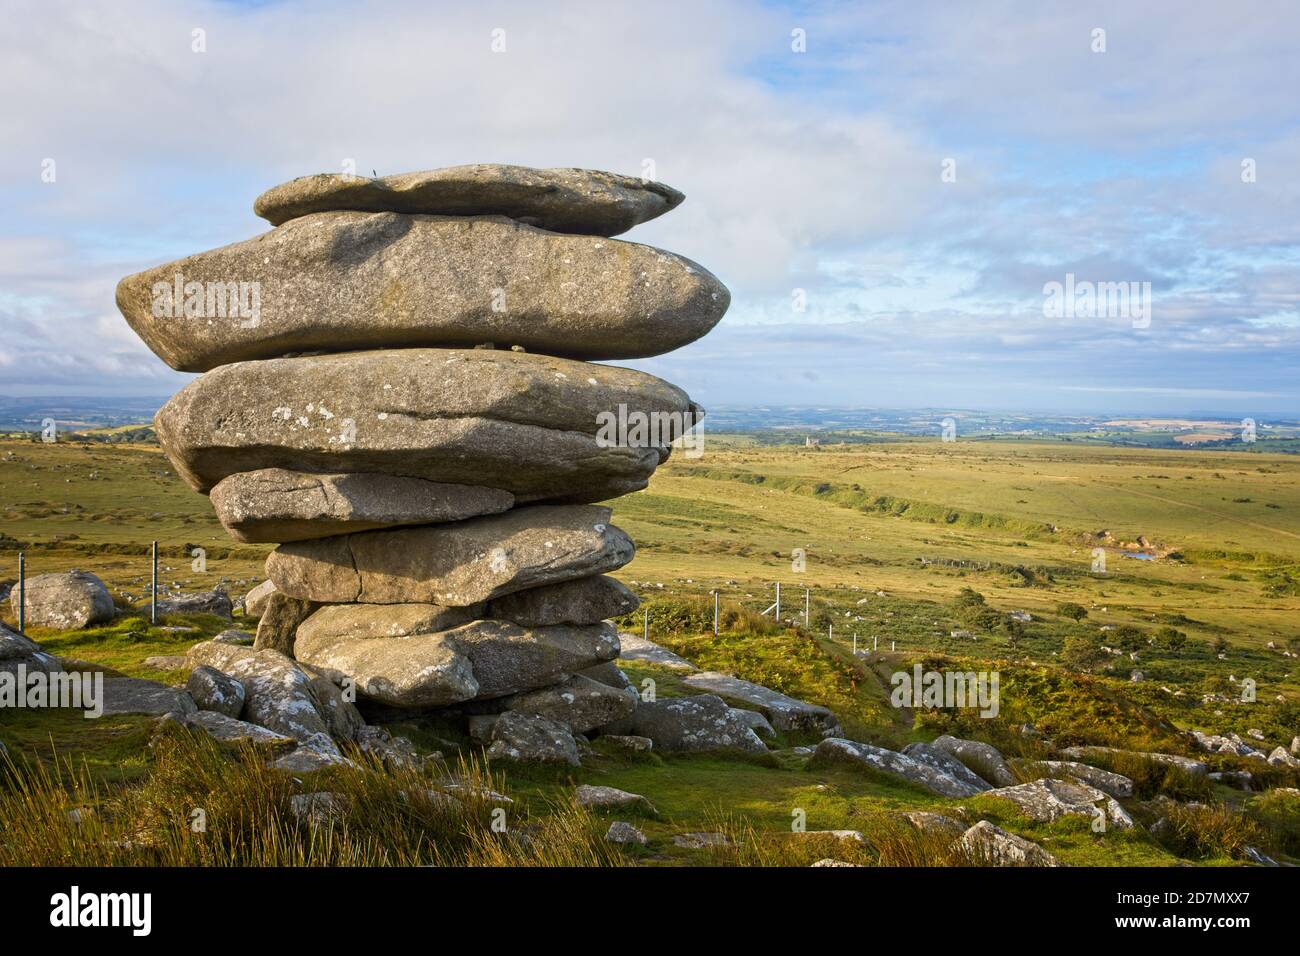 The Cheesewring, a natural formation of granite on Stowe's Hill, Bodmin Moor, near Minions, Cornwall, England, UK. Stock Photo